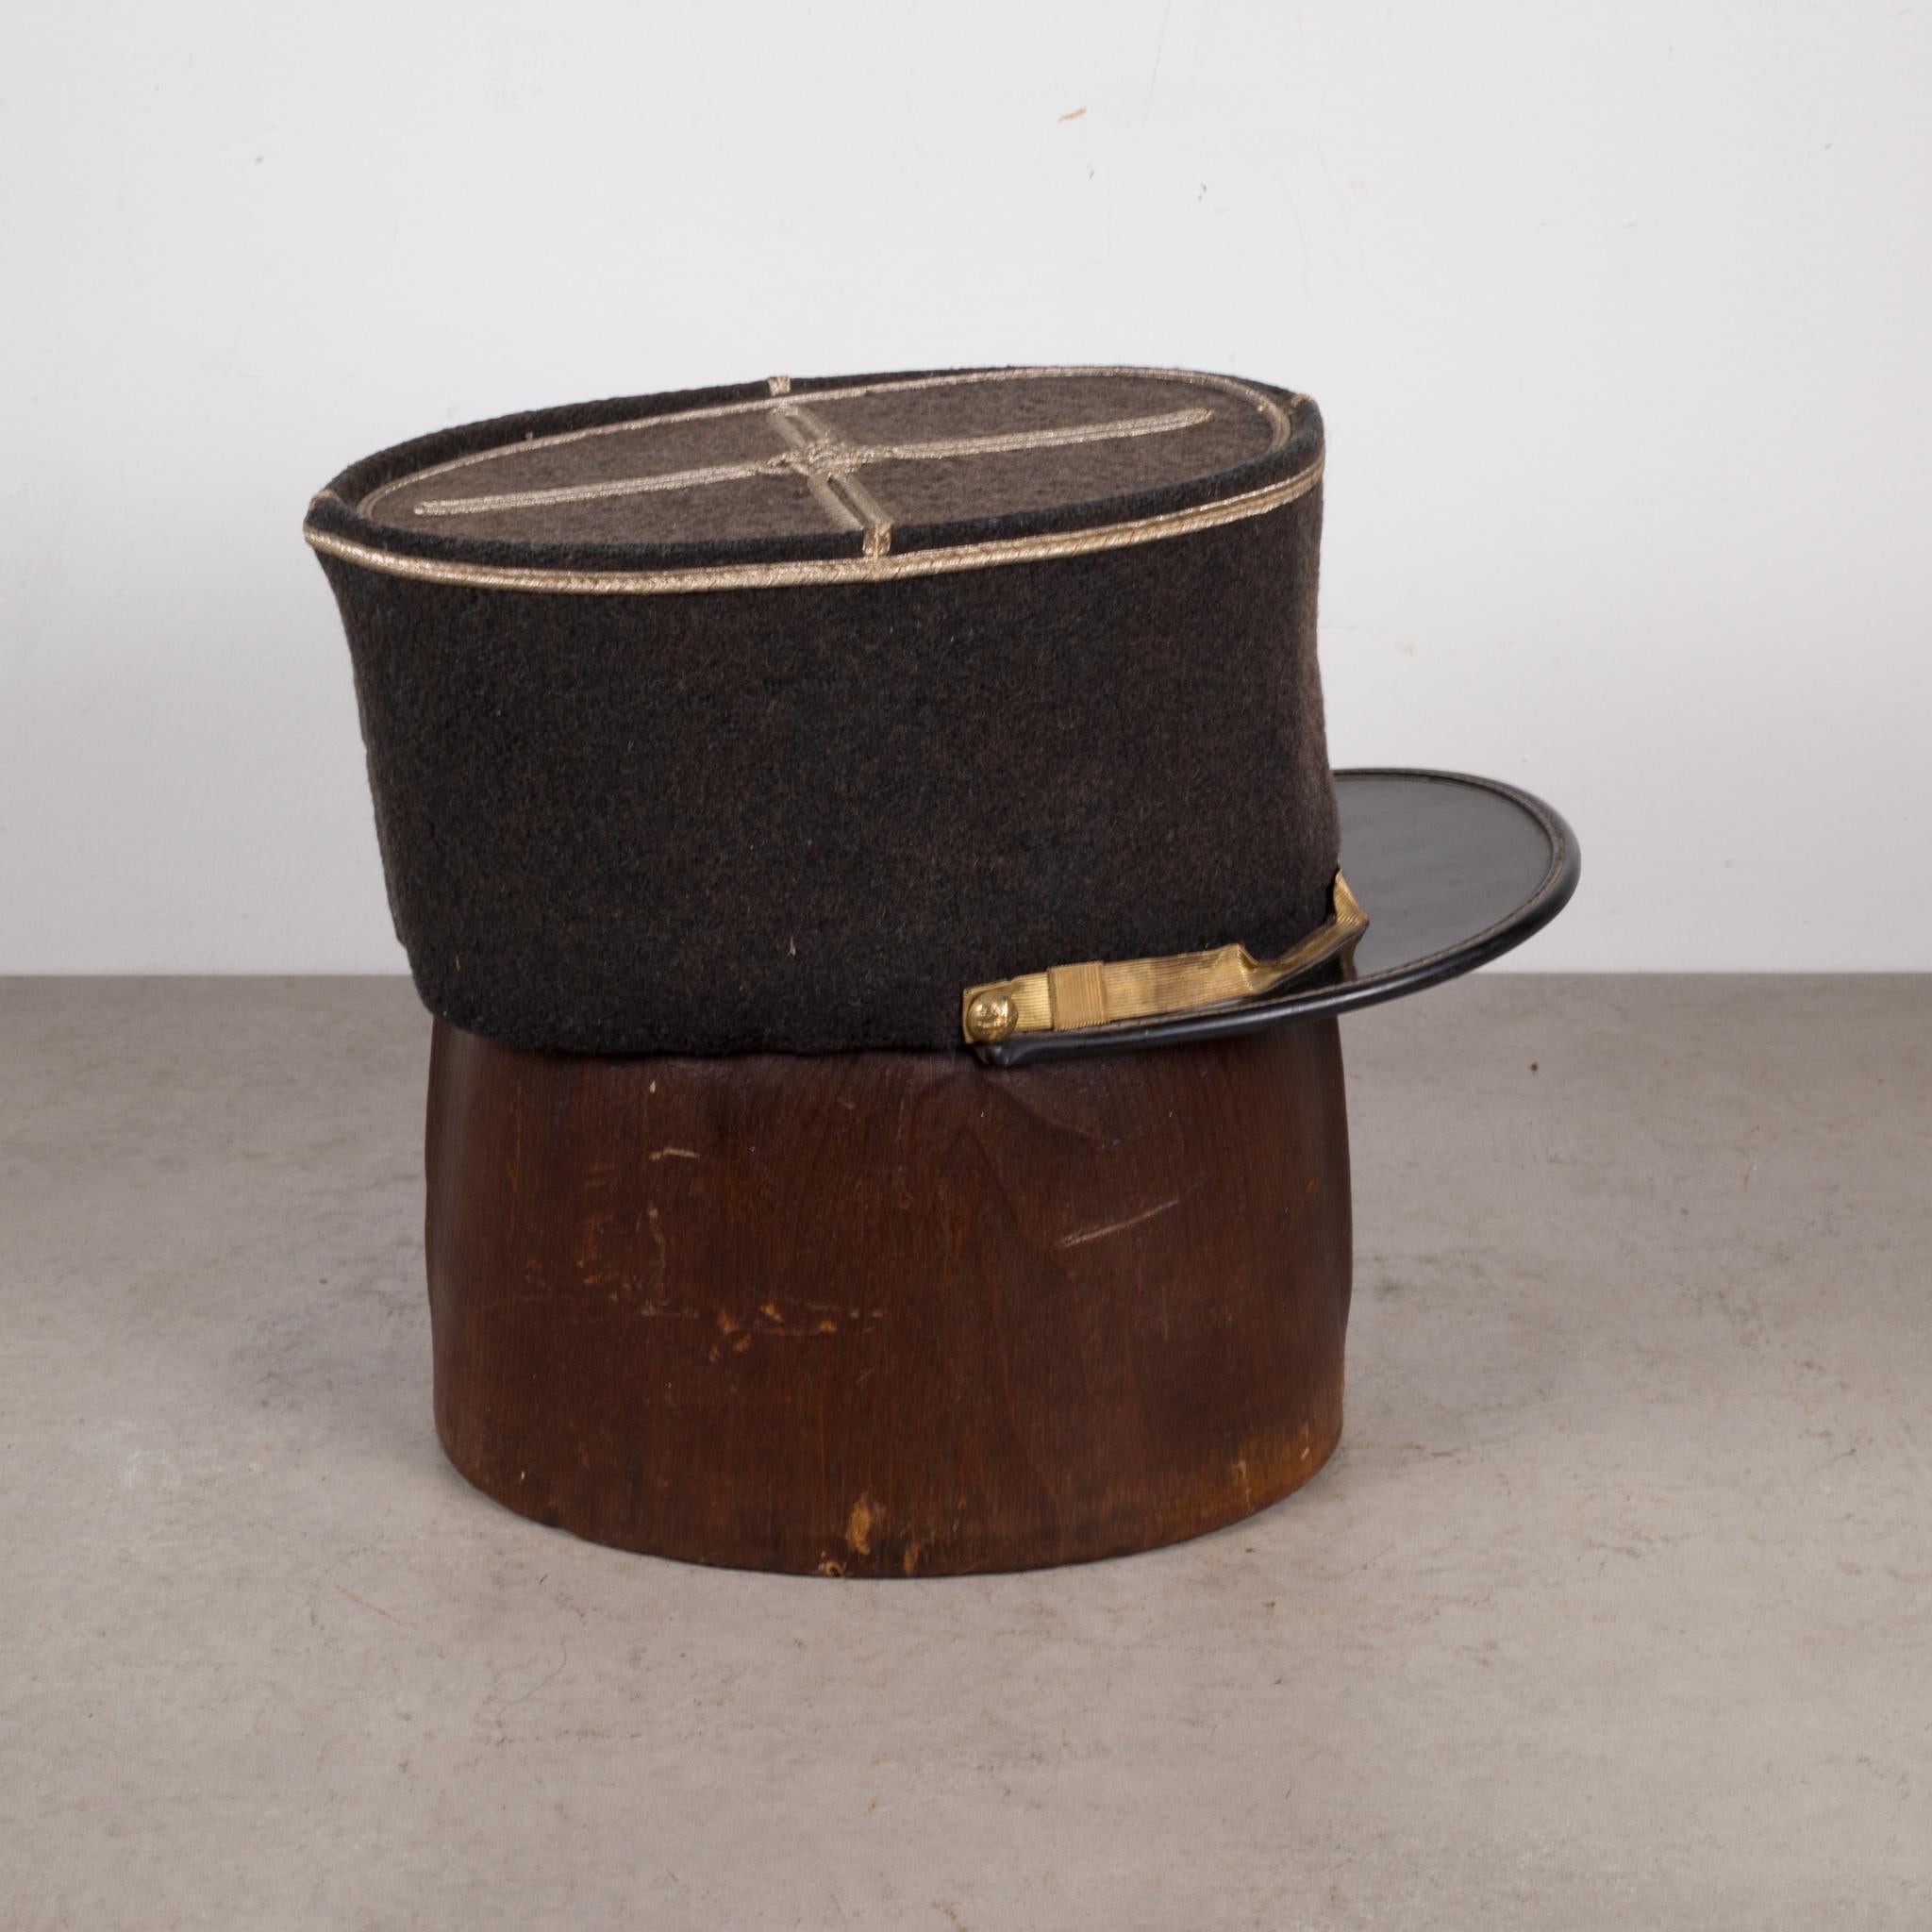 Late Victorian French Army Kepi Cap C.1950